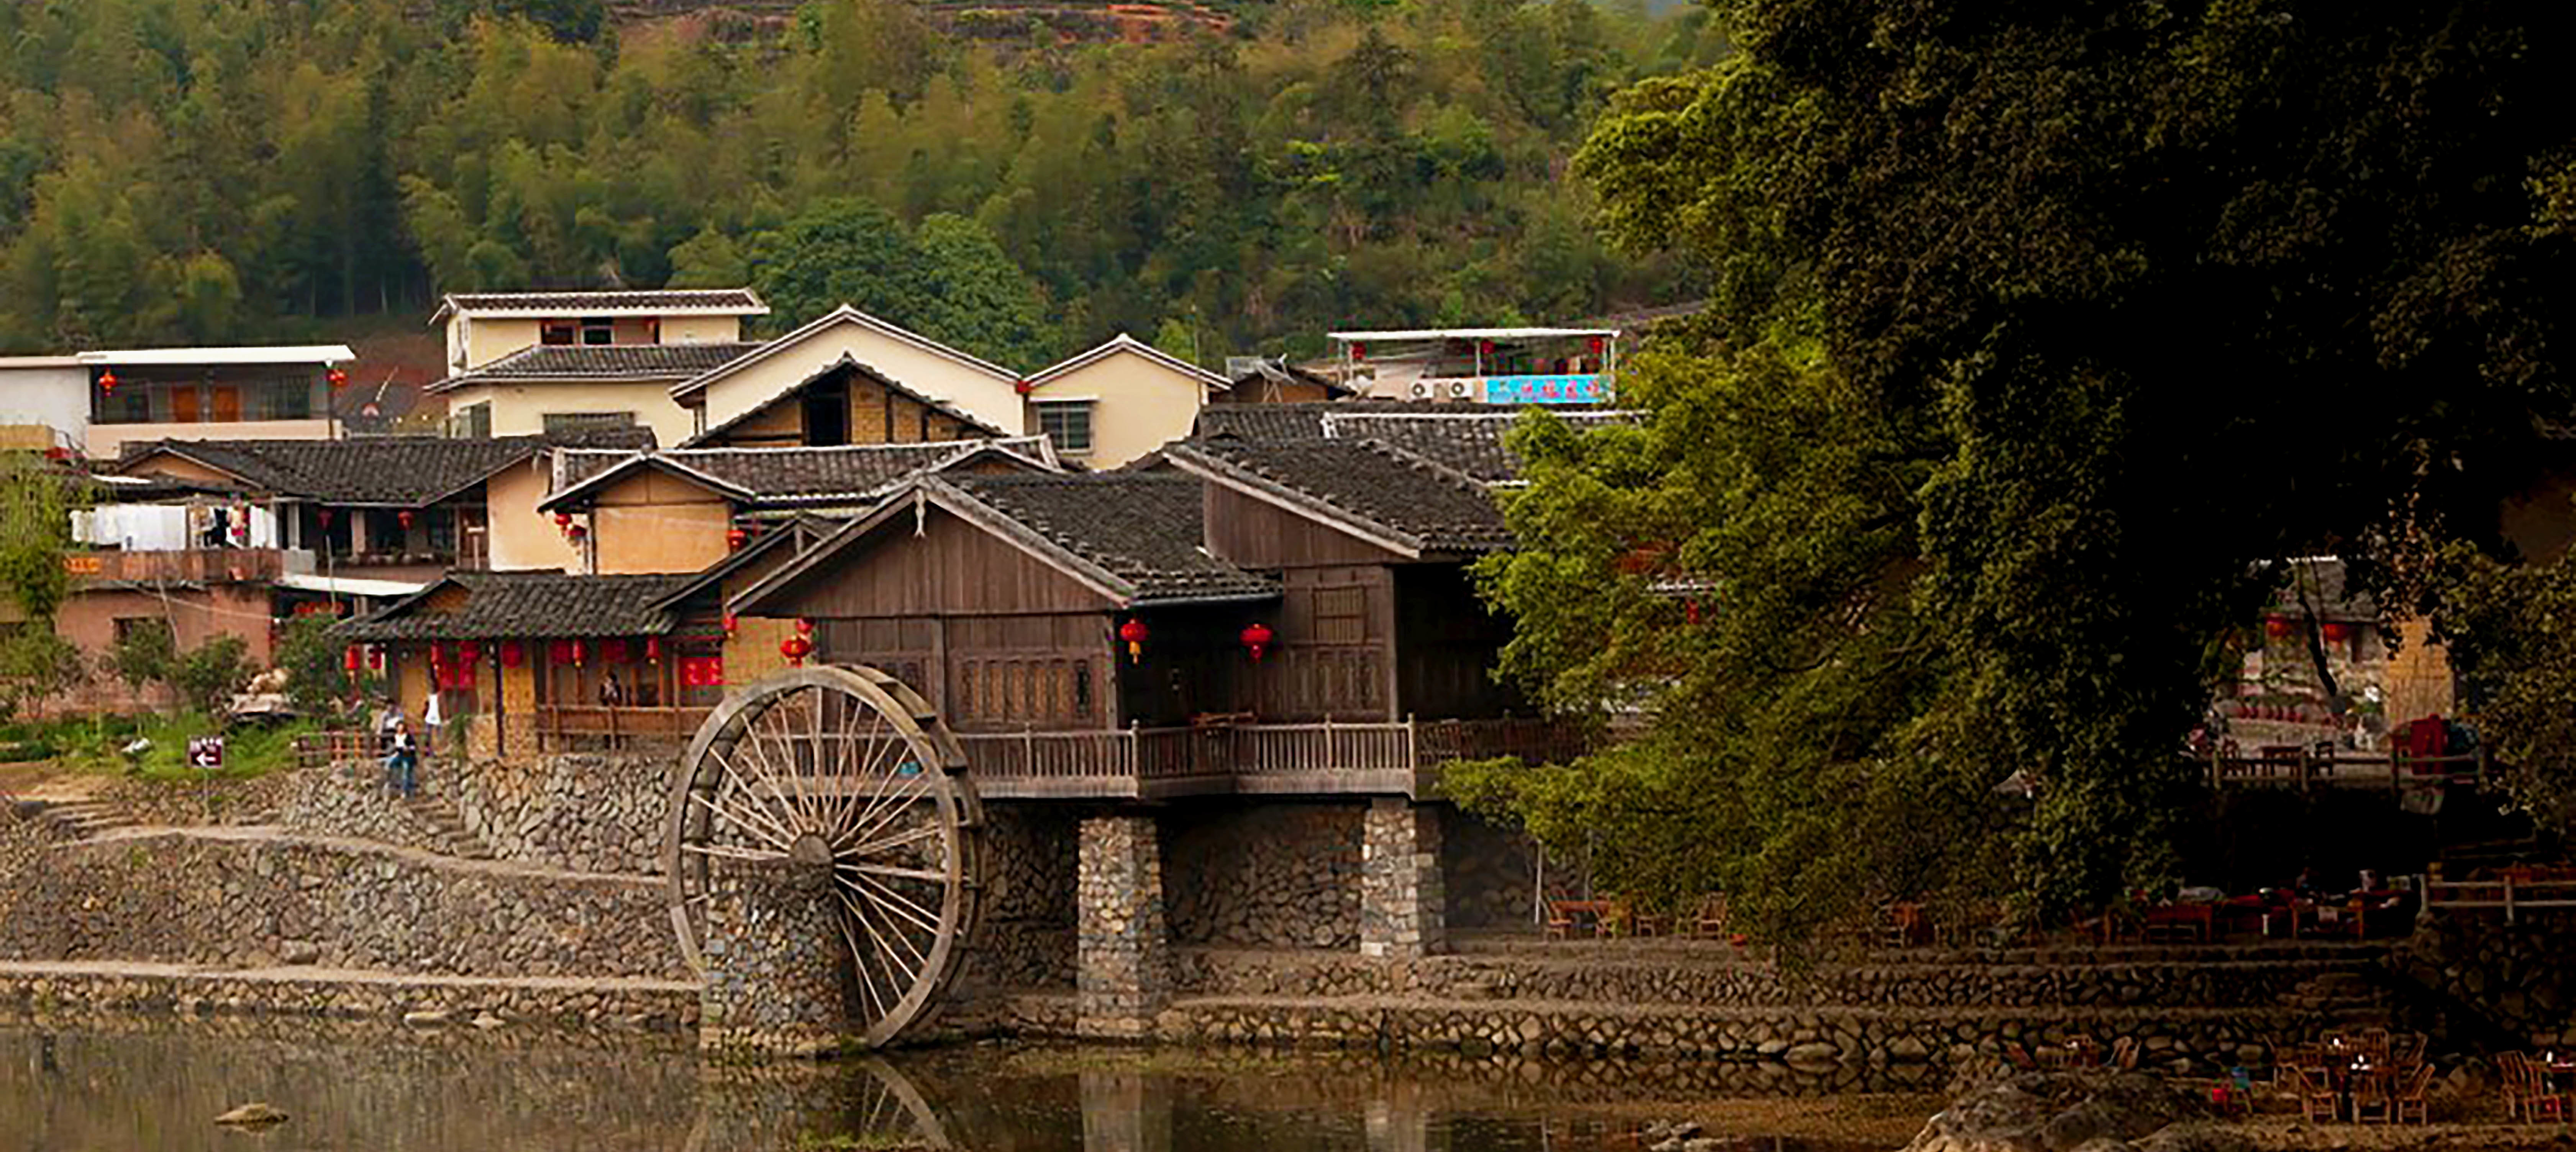 Yunshuiyao Ancient Town & <em>The Knot</em>